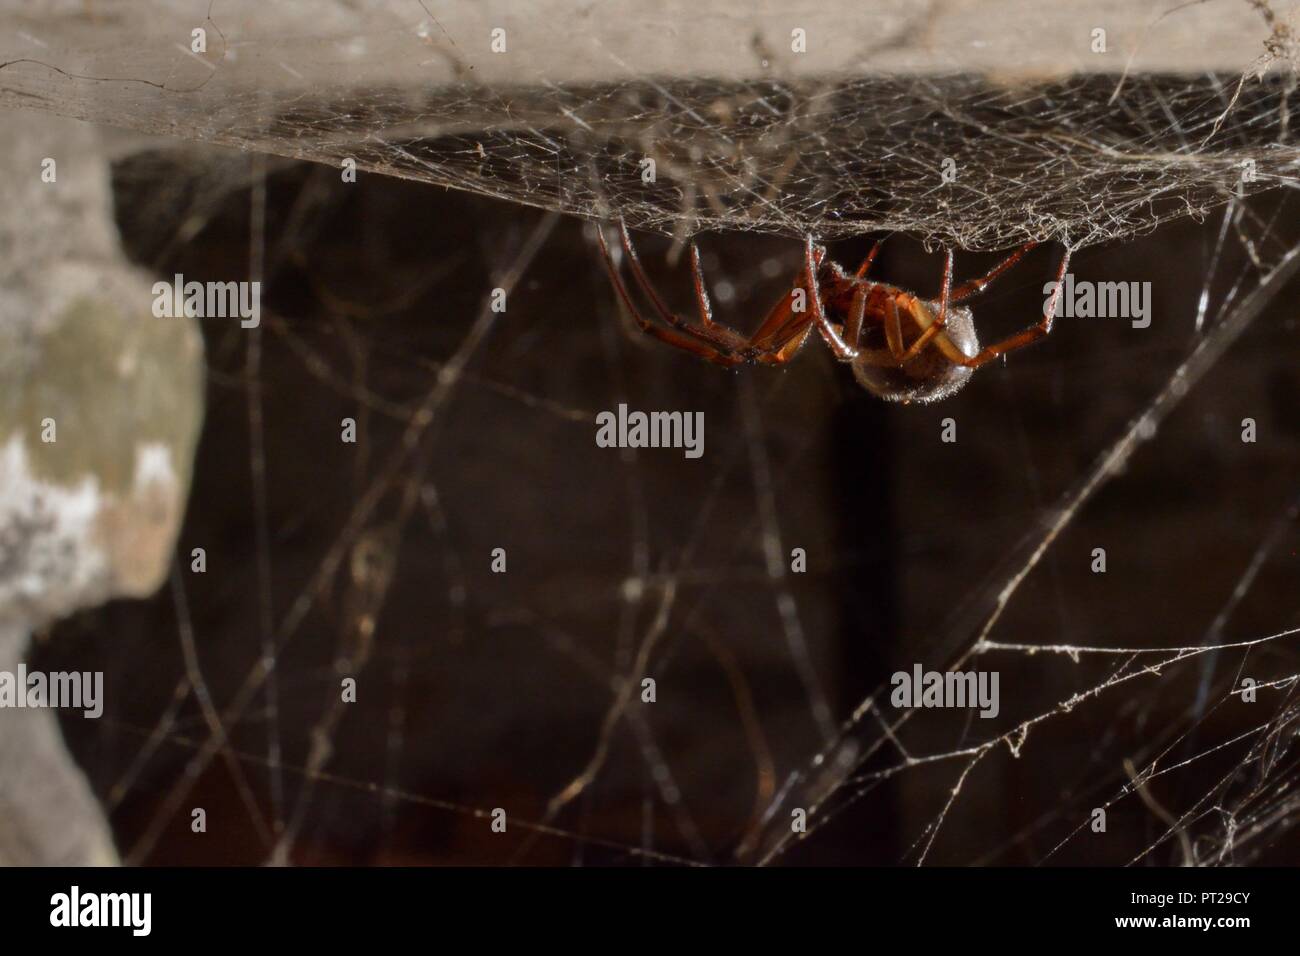 False widow spider / Noble false widow (Steatoda nobilis) female, Britain's most poisonous spider on its web in a wood shed, Near Wells, Somerset, UK. Stock Photo